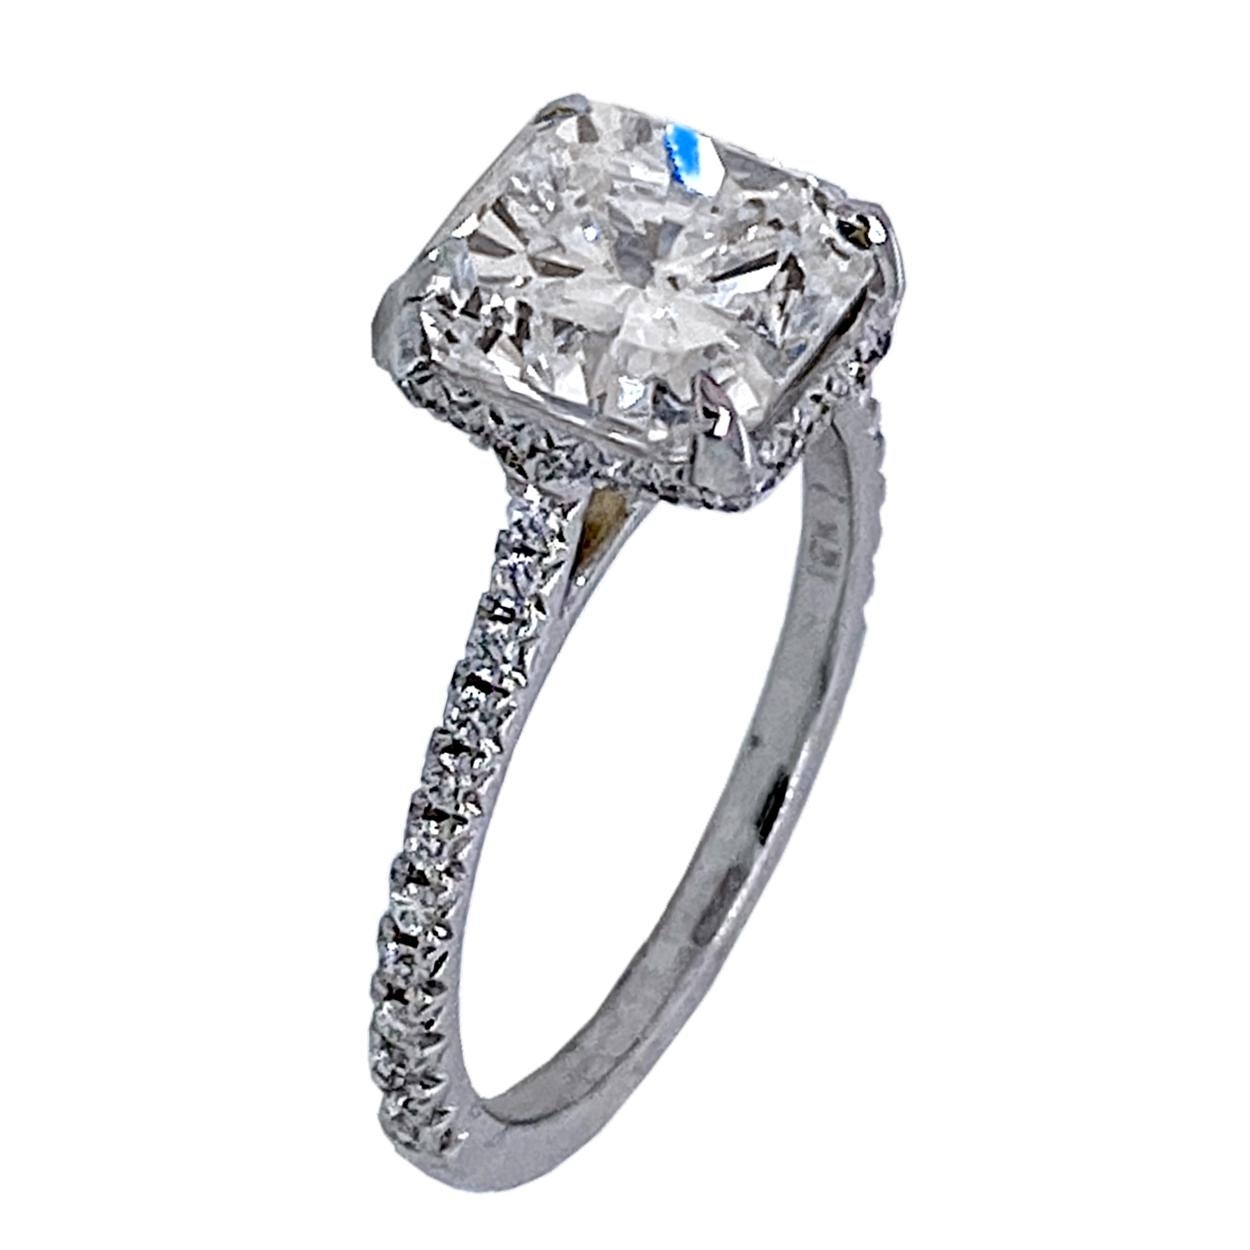 A very fine Square Radiant F/SI1 GIA certified Diamond set in a fine 18k gold French-Pave set Engagement Ring with side halo. Total diamond weight of 0.25 Ct. on the side. 

Diamond specs:
Center stone: 3.00 Ct GIA Certified F/SI1 Radiant natural